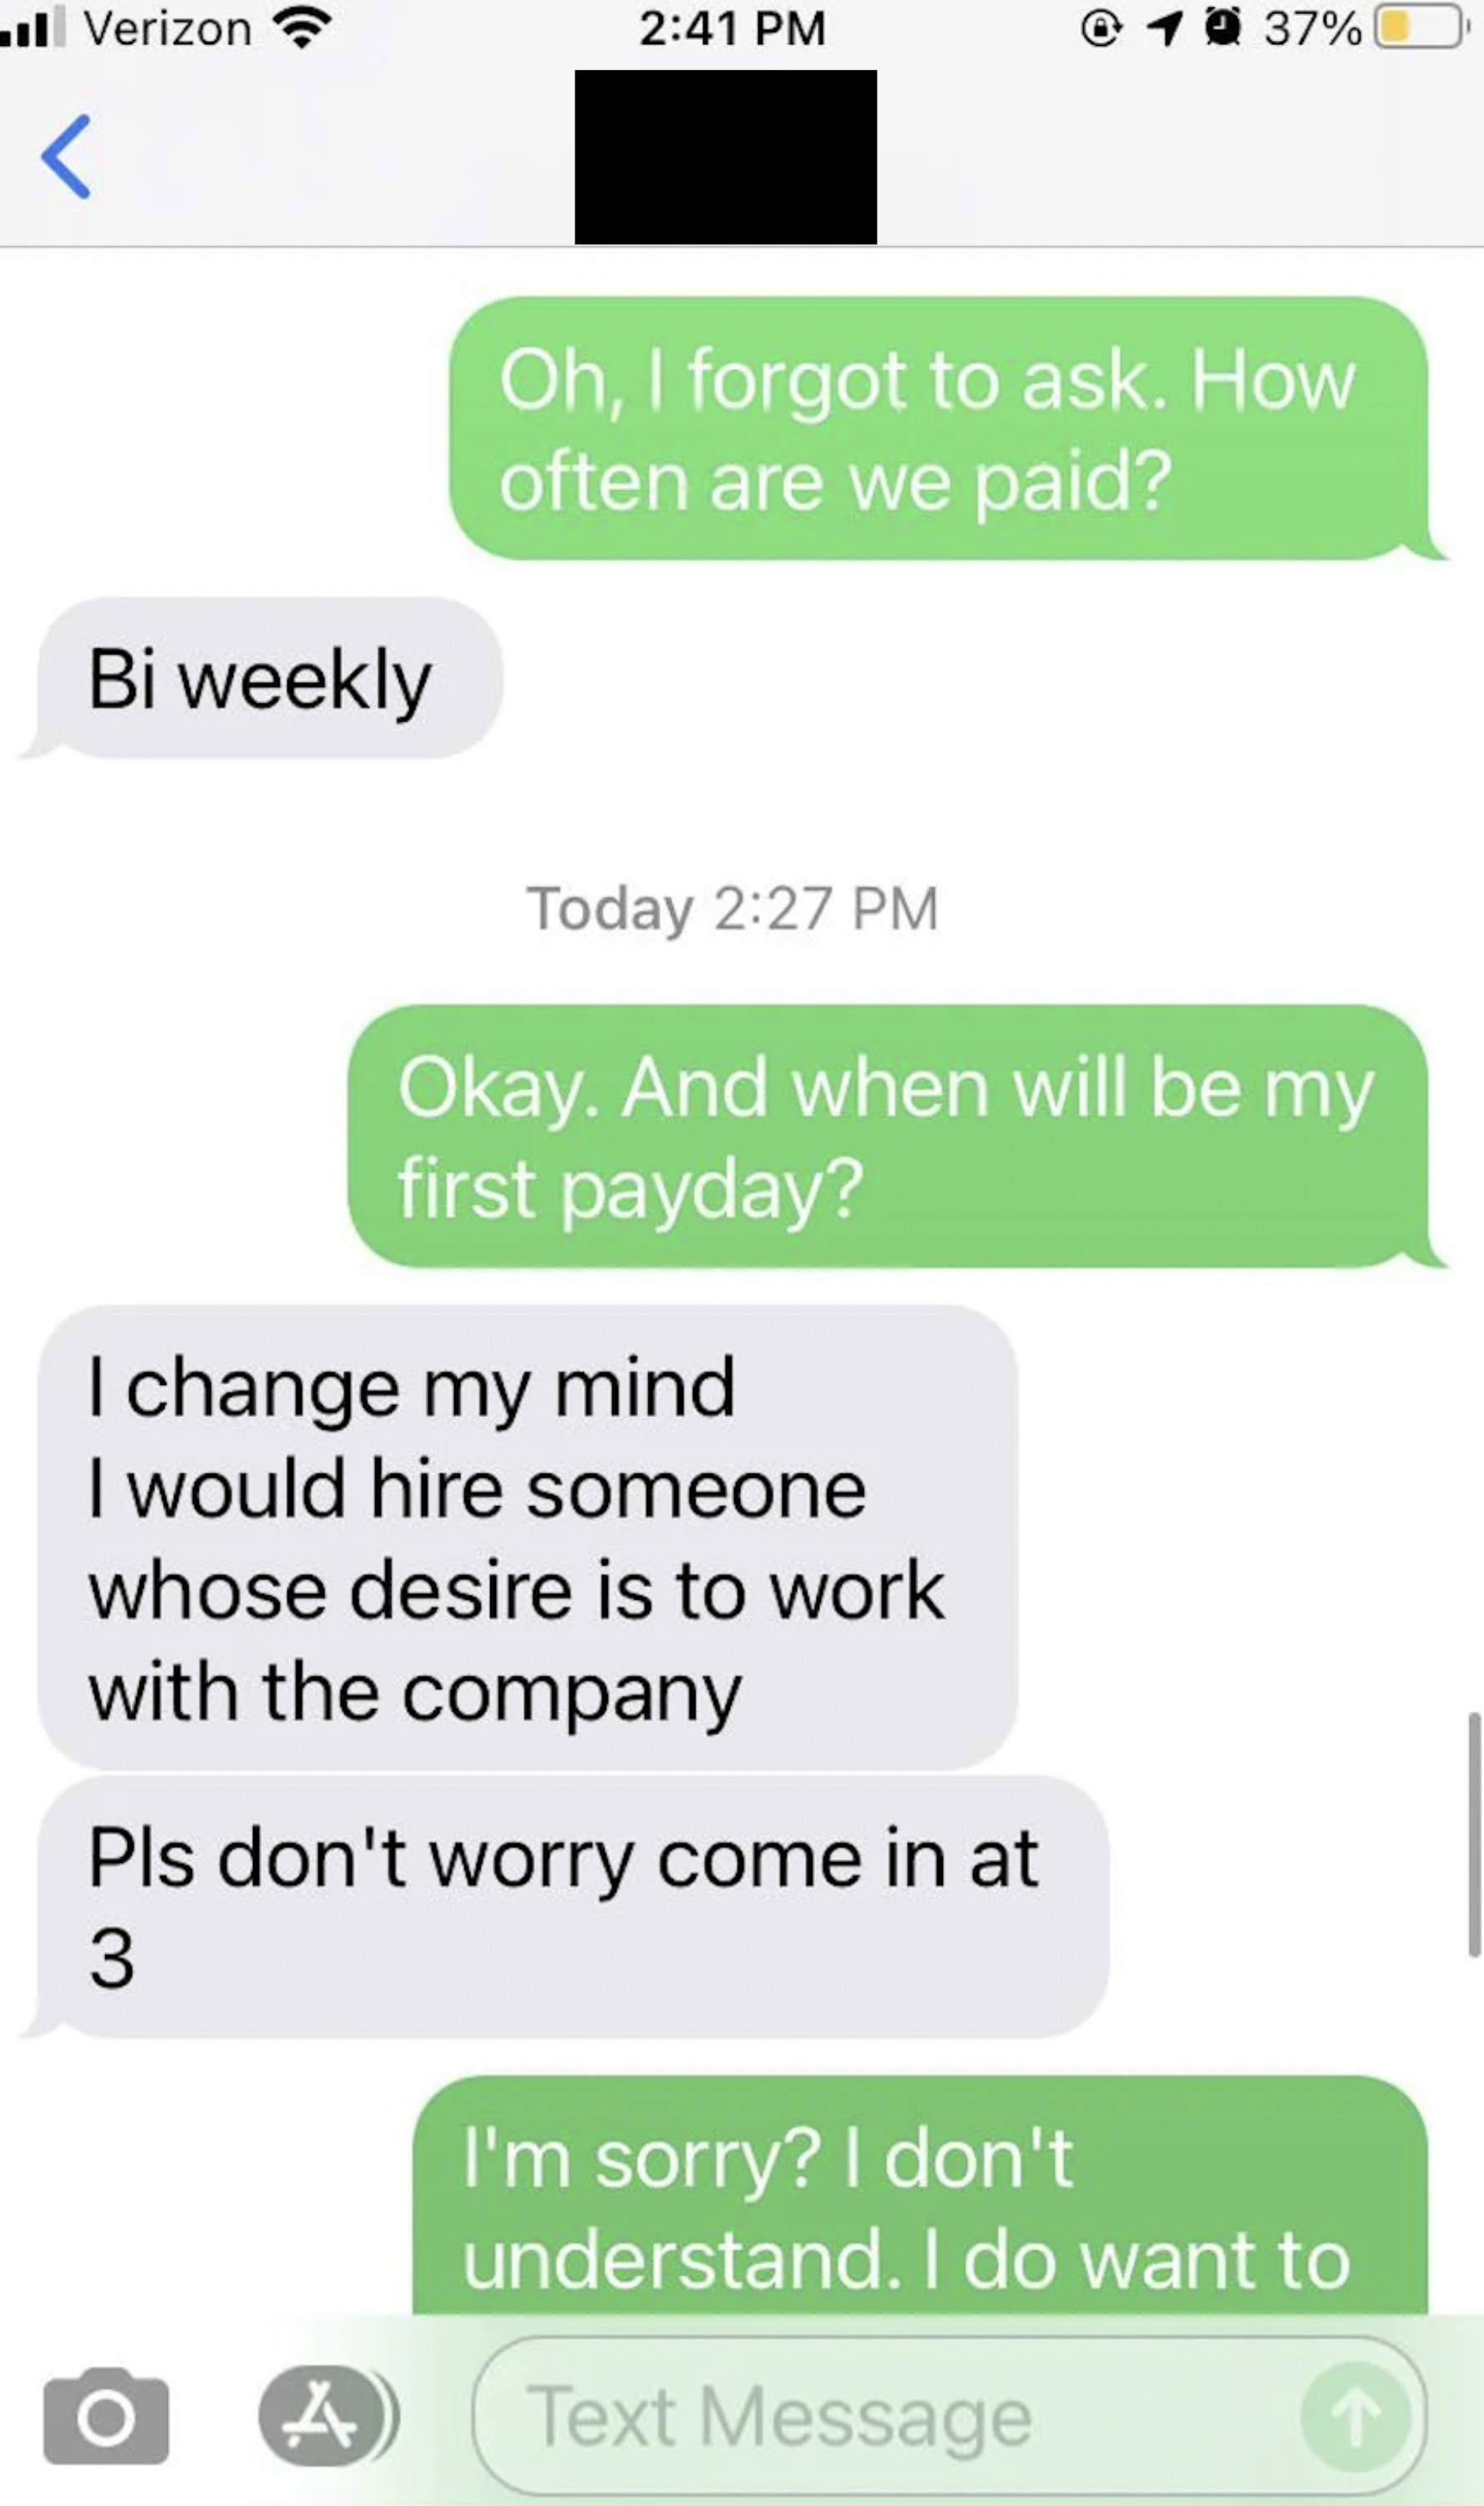 A text exchange showing a boss rescinding a job offer when an employee asks about pay cycles